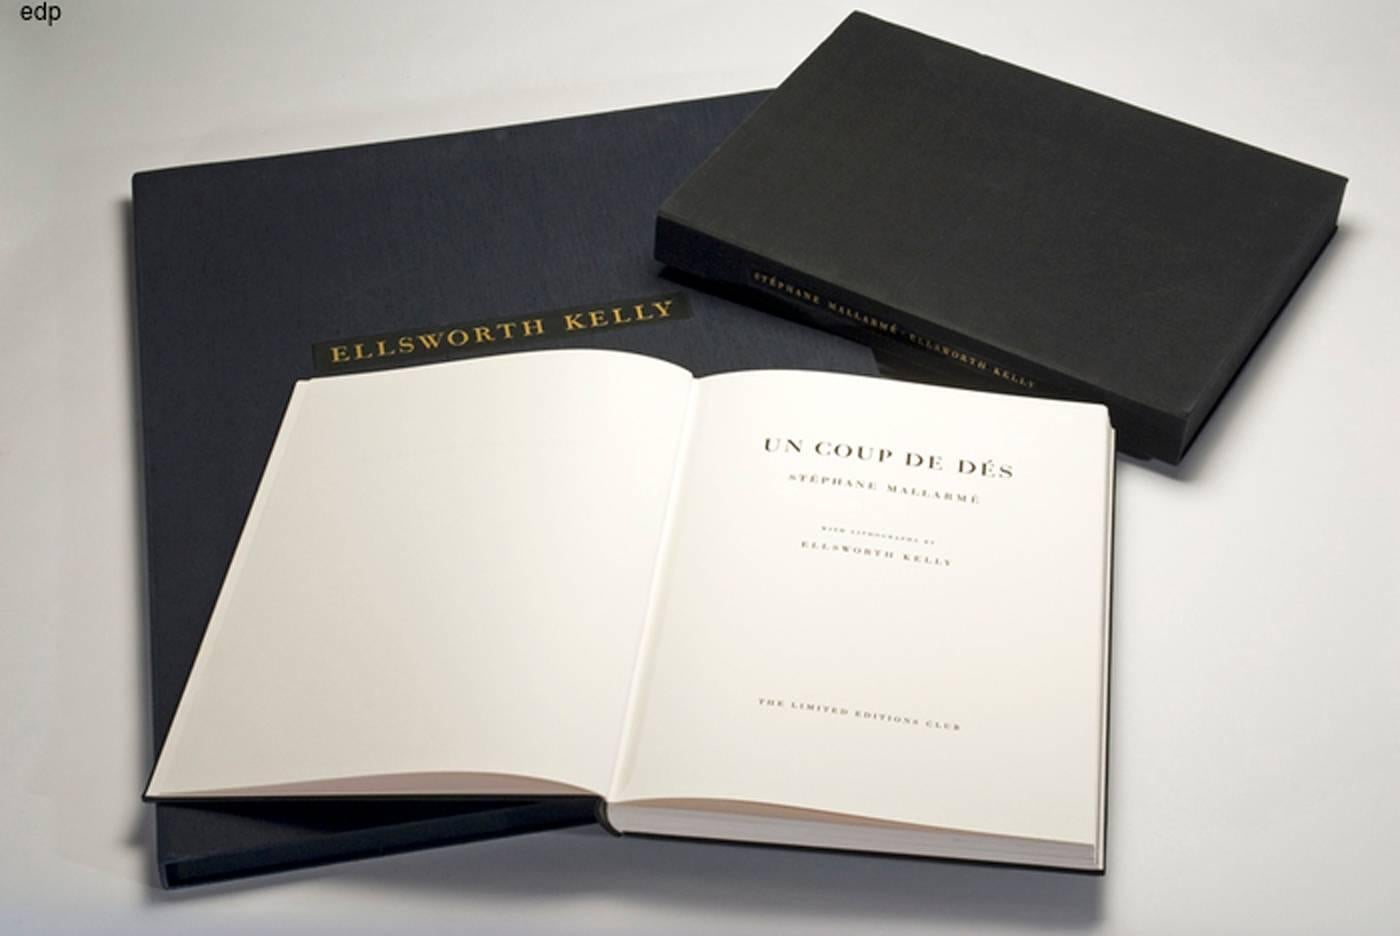 Mallarme and Ellsworth Kelly, Stephane. THE MALLARME SUITE and UN COUP DE DES JAMAIS N'ABOLIRA LE HASARD (A THROW OF THE DICE NEVER WILL ABOLISH CHANCE). Limited Editions Club, NY, 1992. 

A: The Suite: Elephant Folio (30 1/2 inches tall). Limited